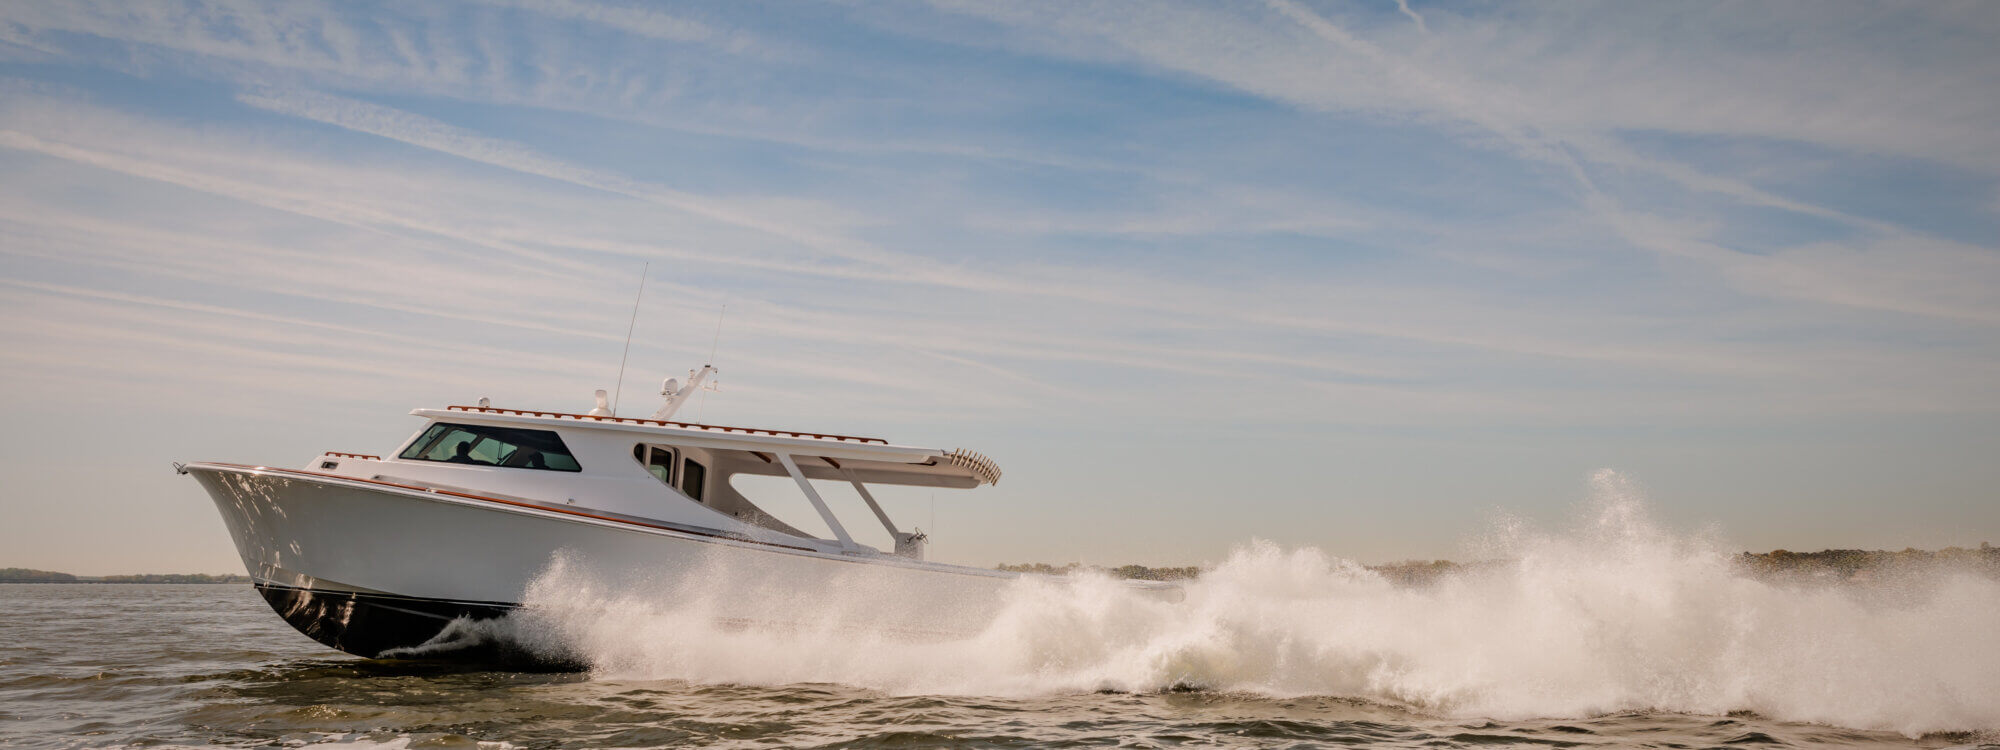 Composite Yacht use Scott Bader’s market leading marine systems to manufacture sport fishing boat